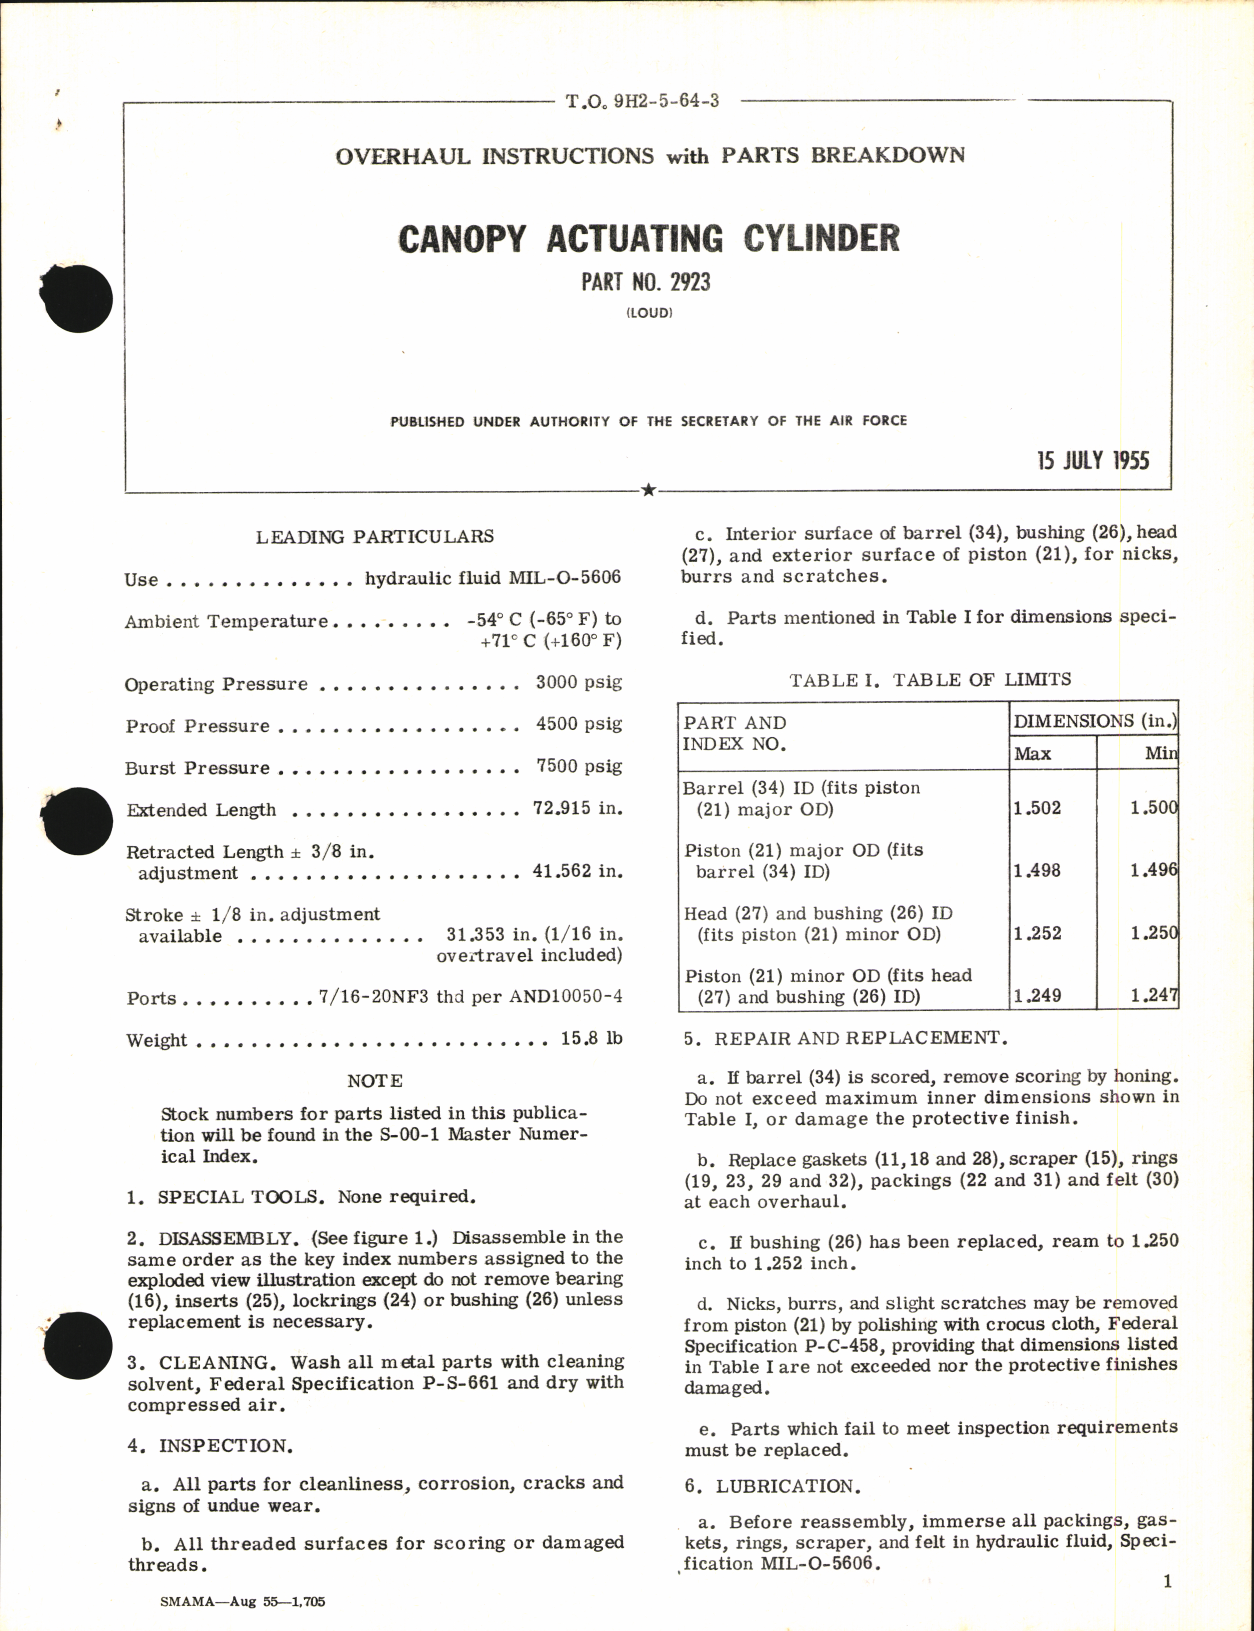 Sample page 1 from AirCorps Library document: Overhaul Instructions with Parts Breakdown for Canopy Actuating Cylinder Part No. 2923